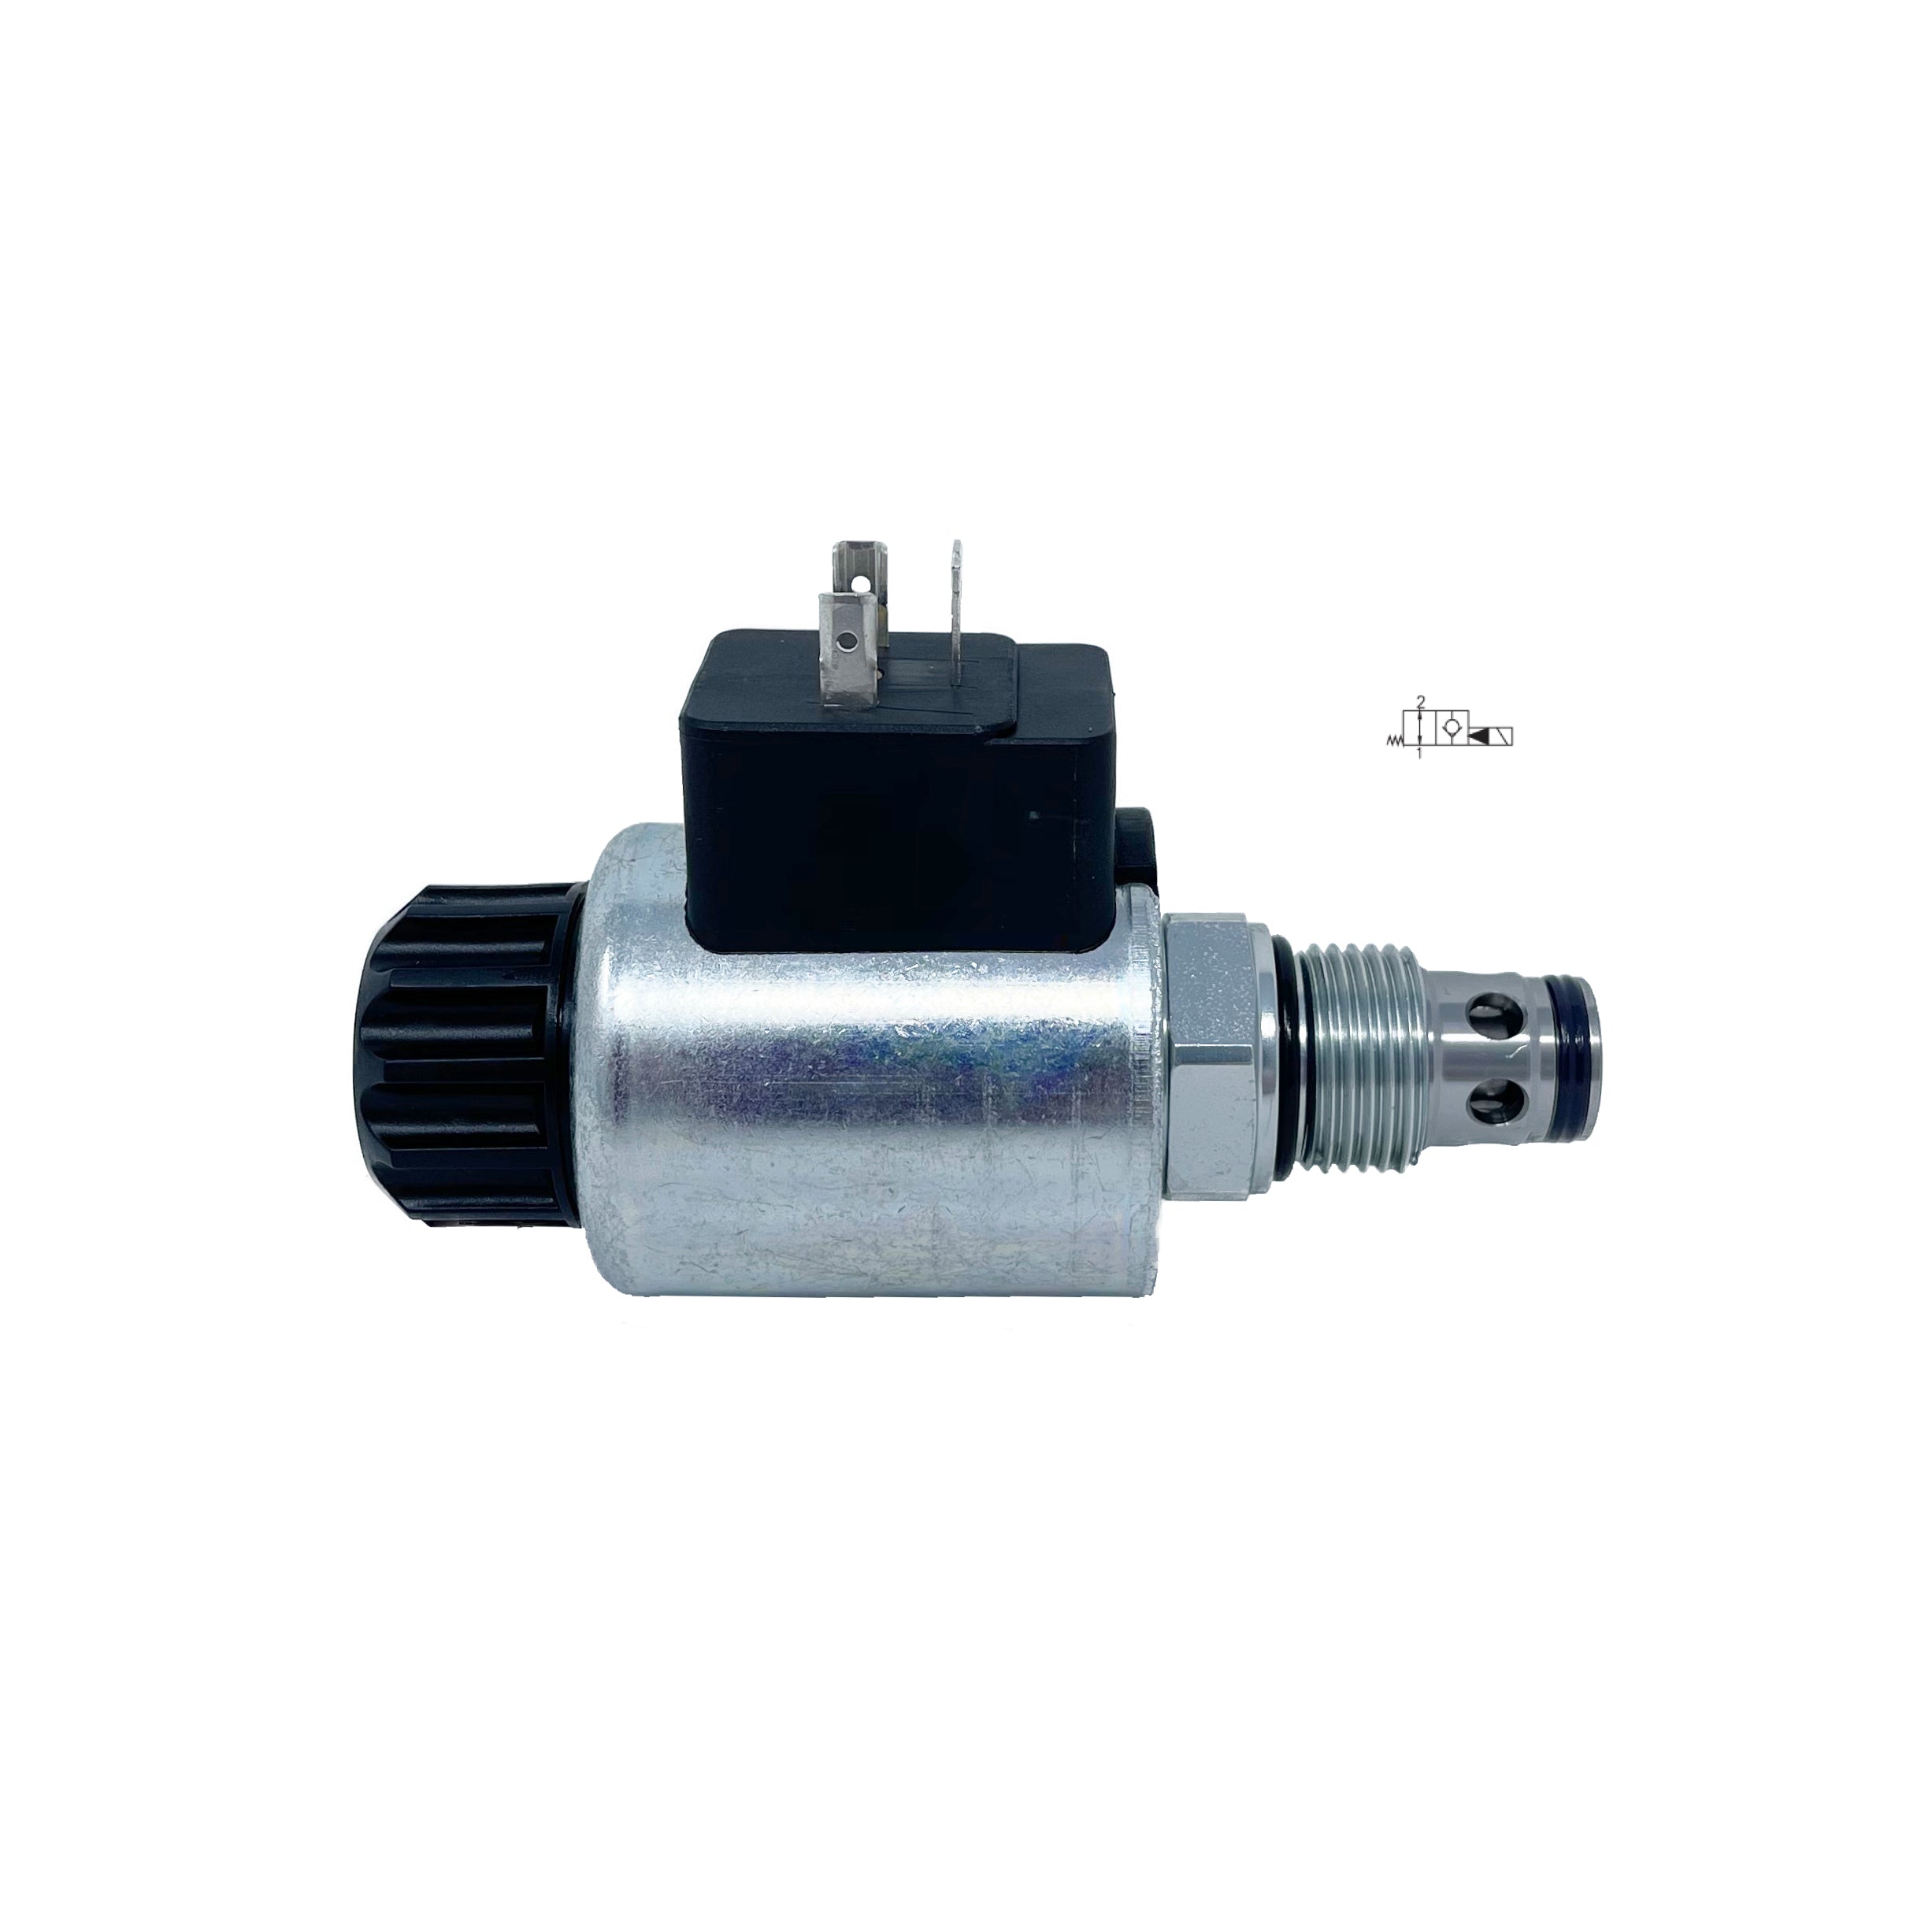 SD3E-B2/H2O2A24DIN : Argo DCV, 16GPM, 5100psi, 2P2W, C-10-2, 24 VDC DIN, Flow 1 to 2 Neutral